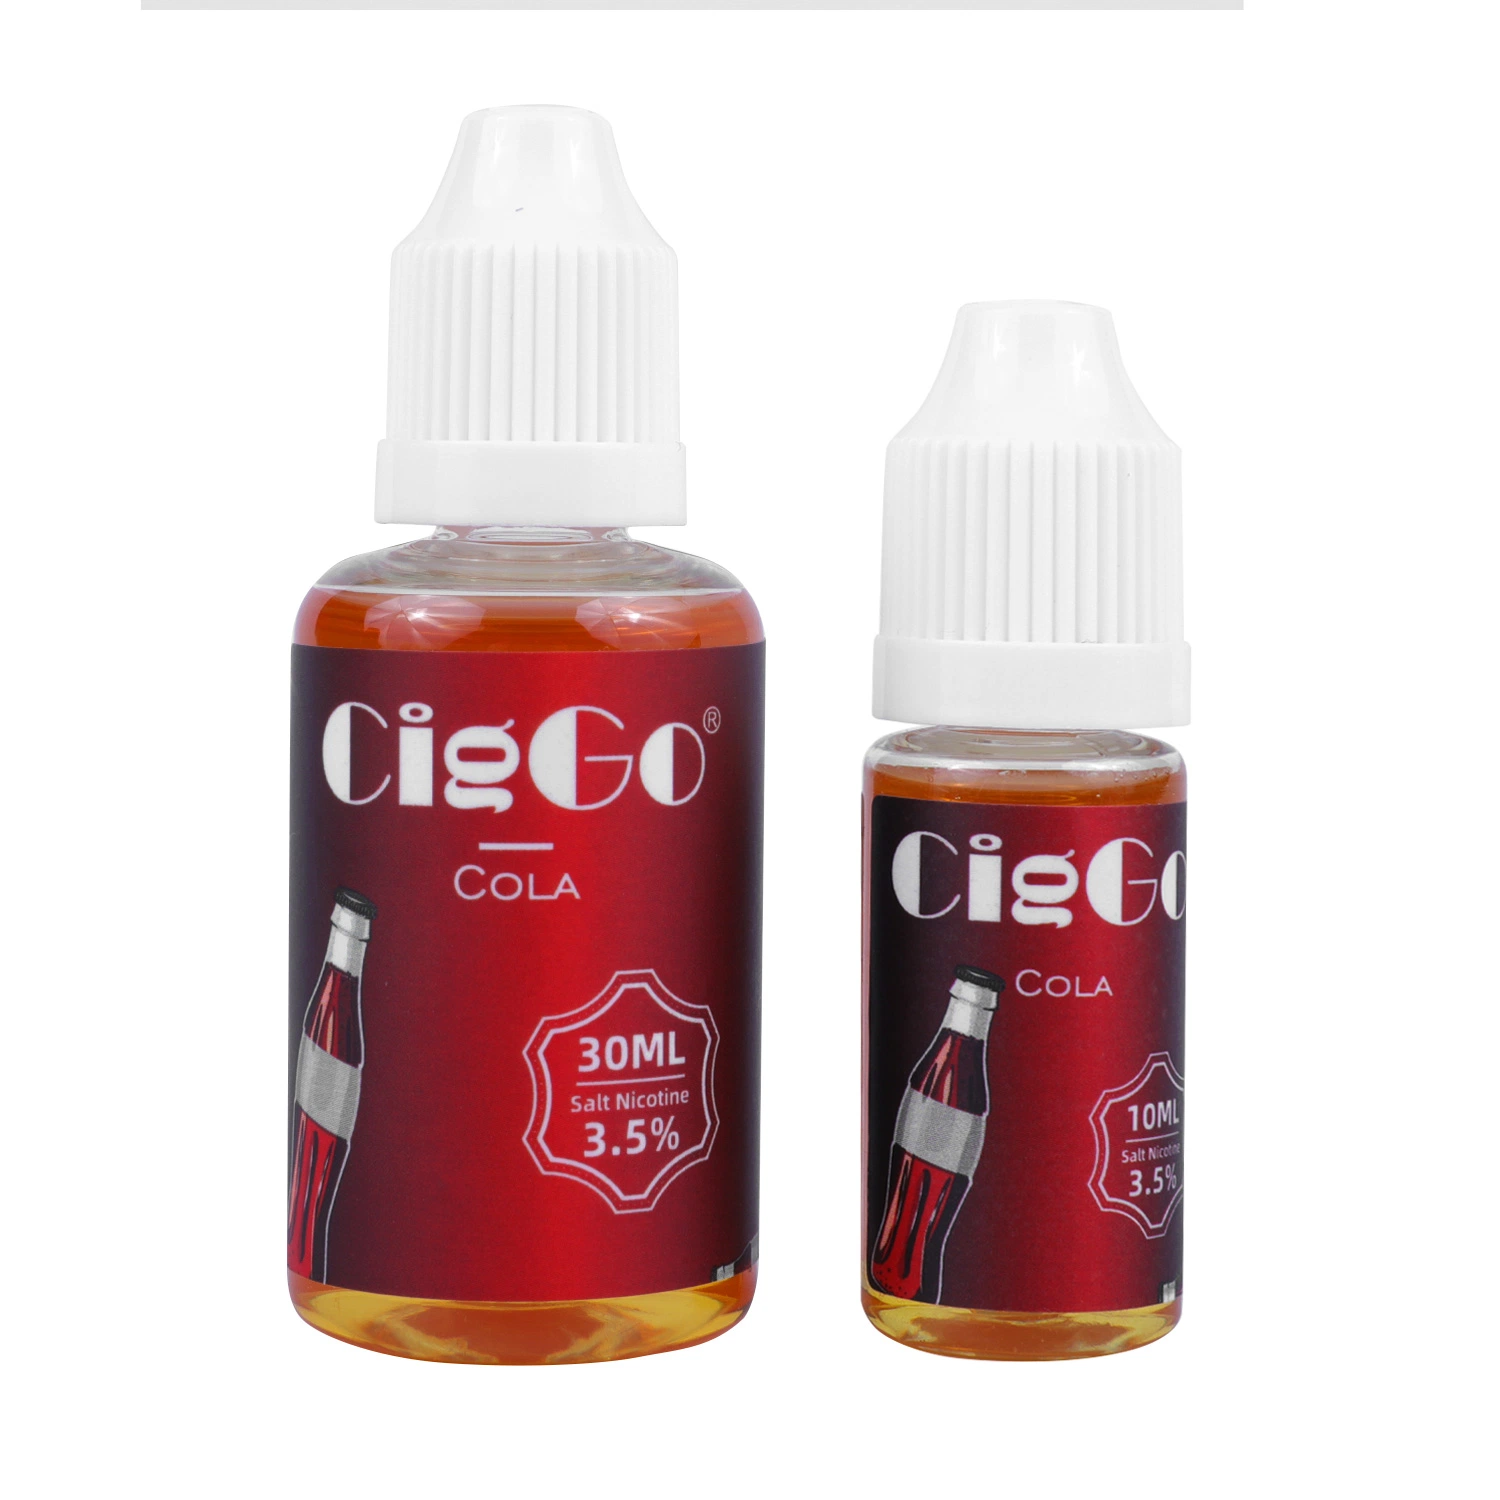 E-Refill Liquid for E-Cigarette Customized Labels and Boxes Are Available Tobacco Flavor E-Liquid Supplier of Vape Kits Vape Tanks and Replacement Coils